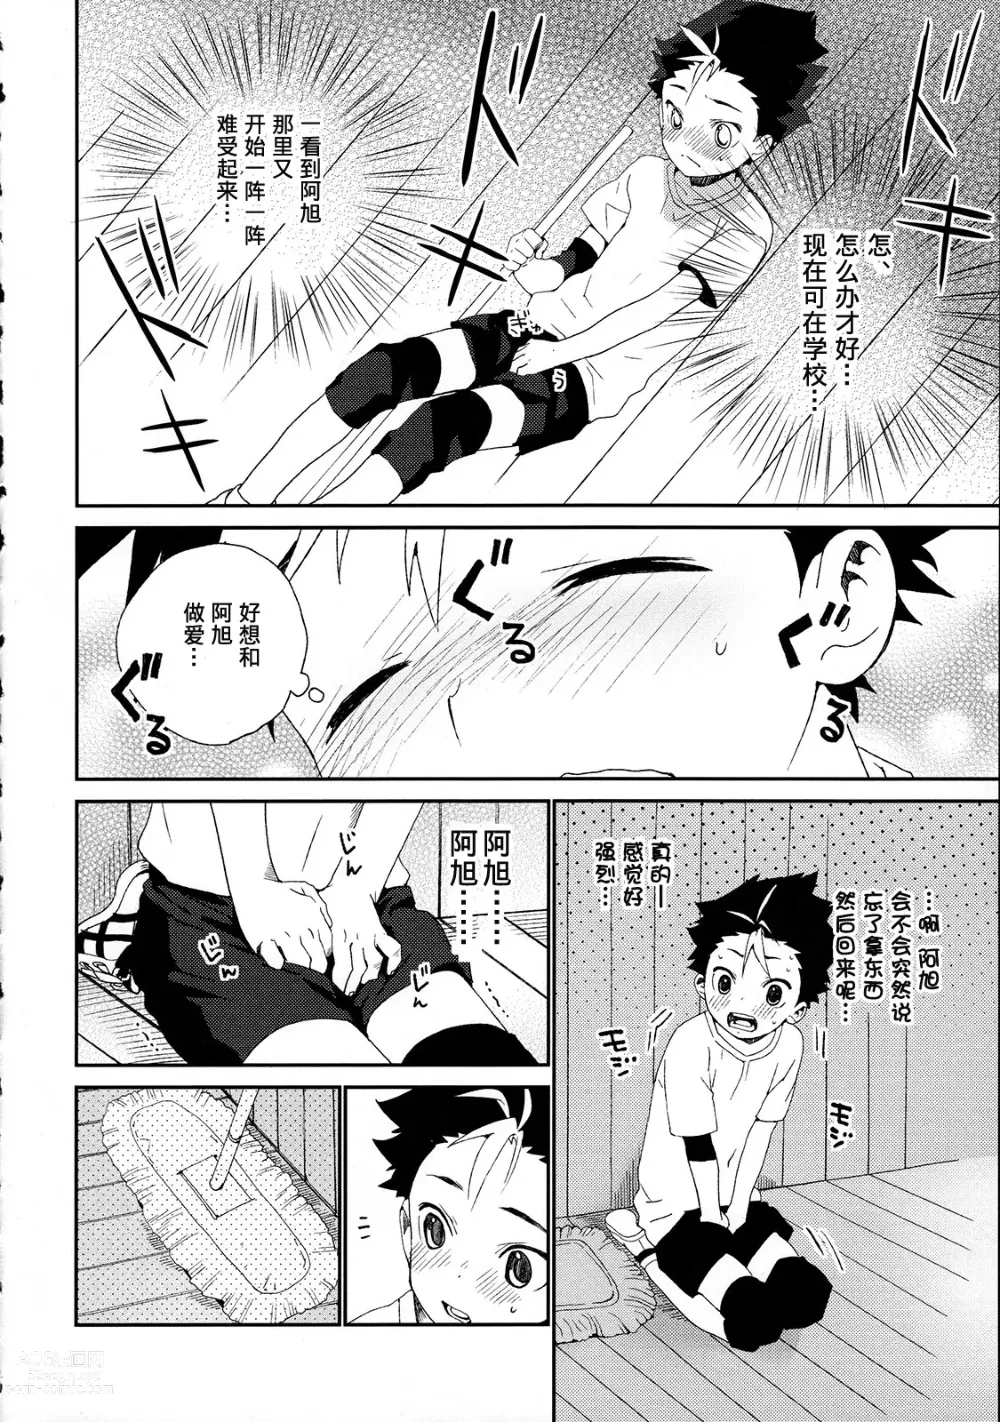 Page 12 of doujinshi 西谷君的发情期